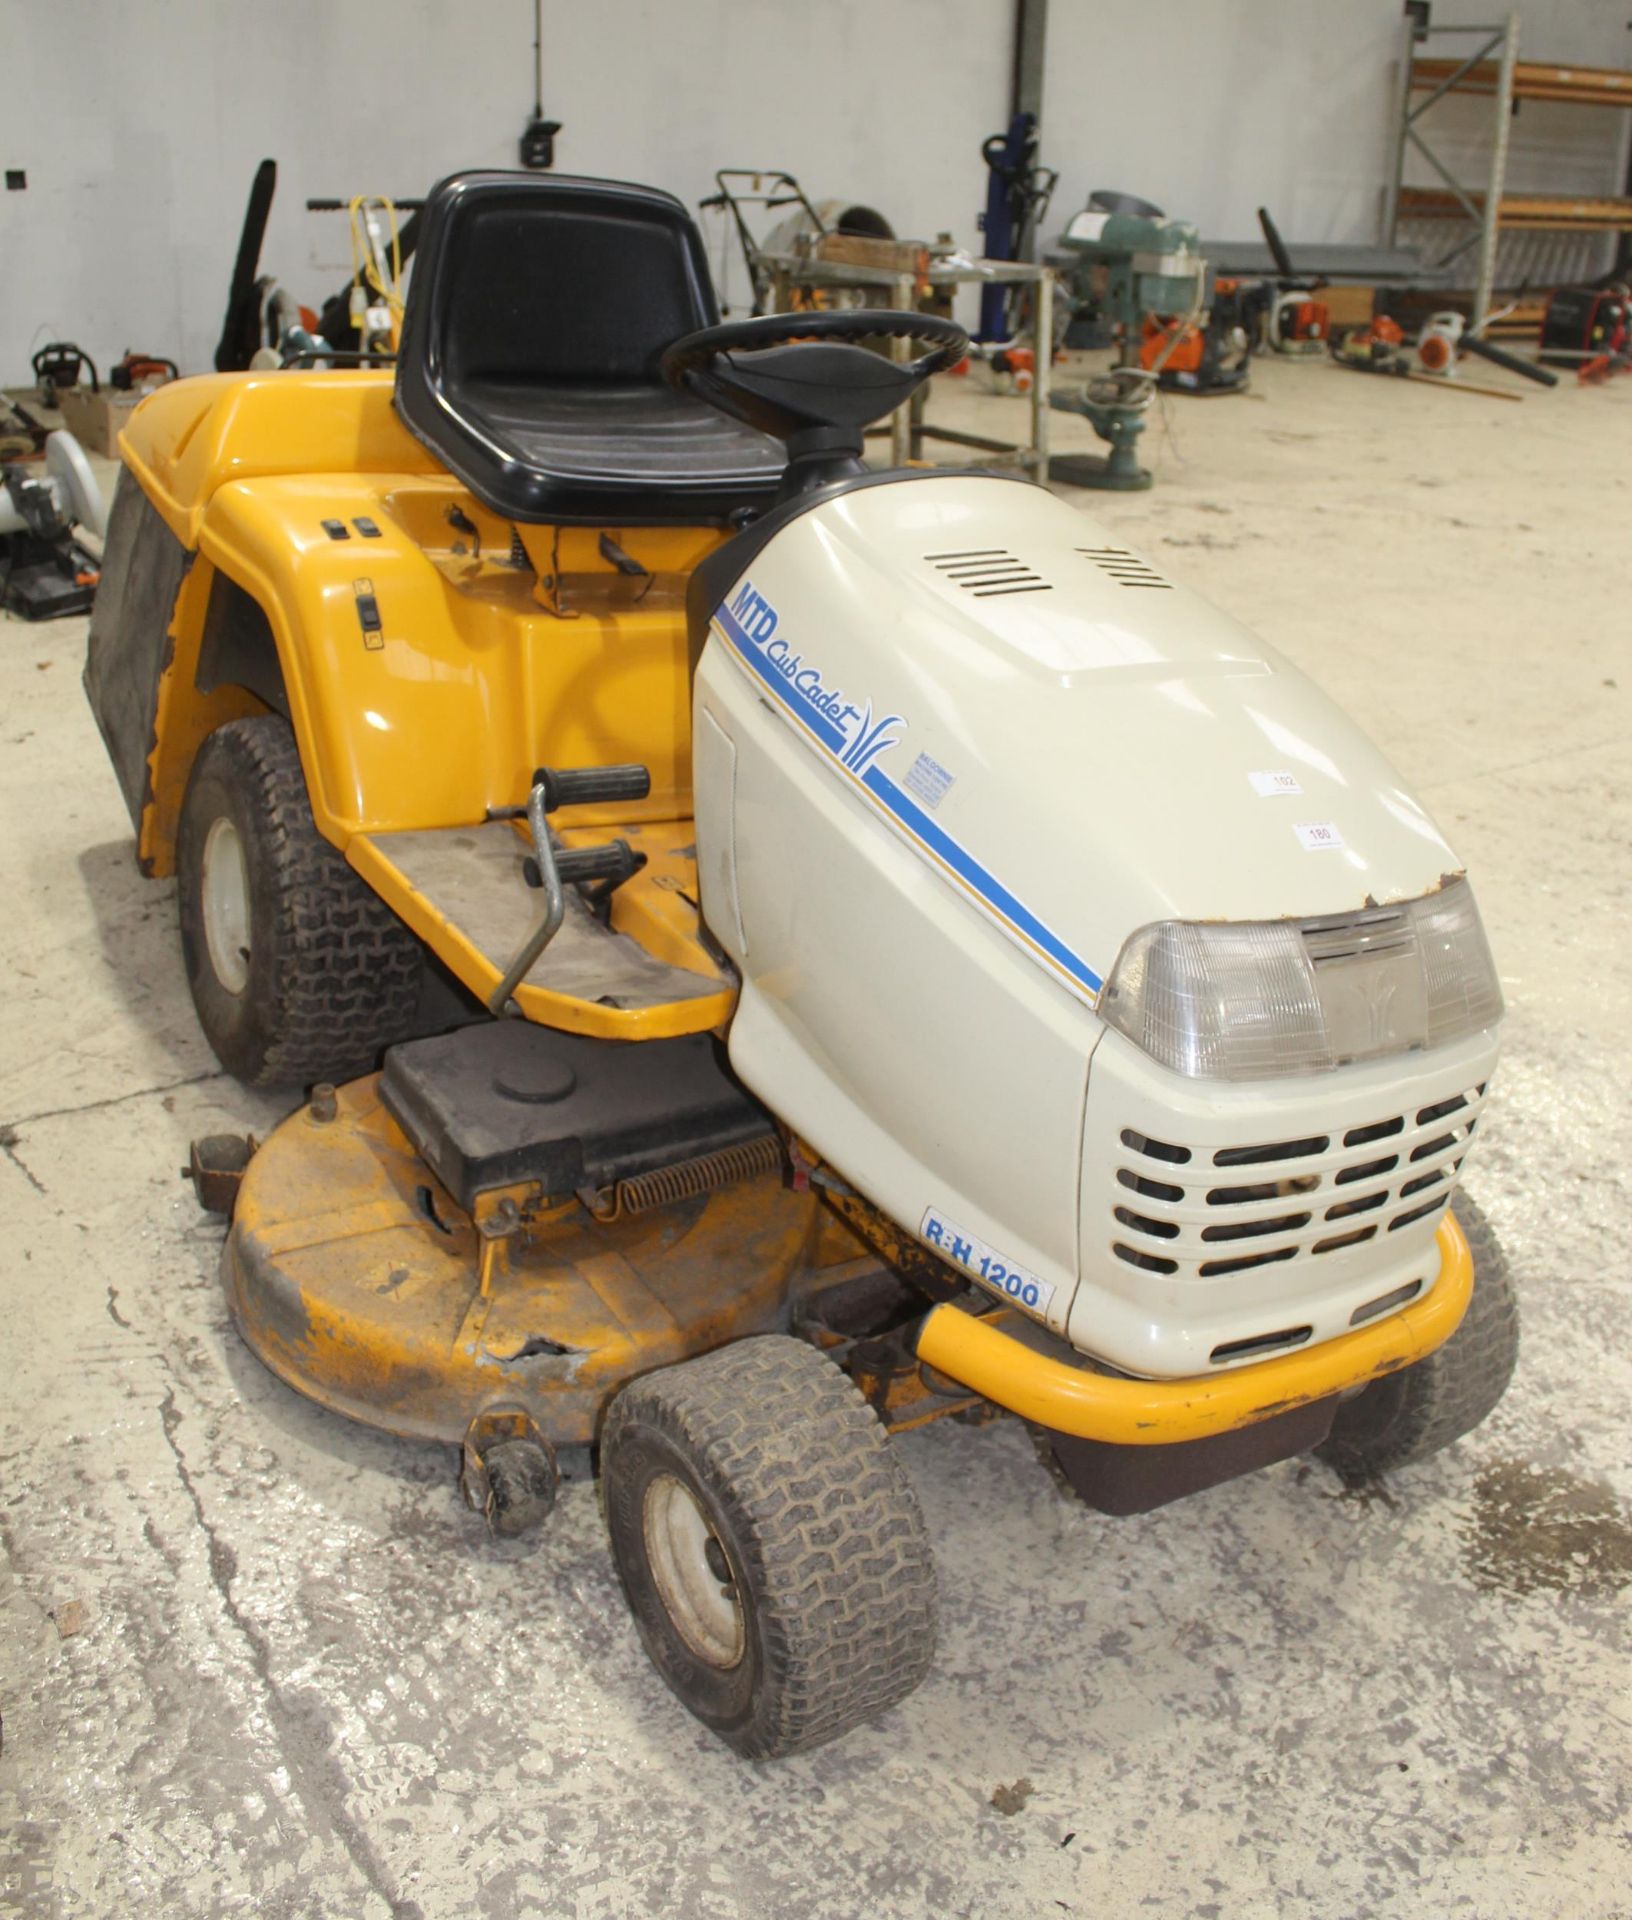 MTD CUB CADET RIDE ON MOWER WITH BRIGGS & STRATTON VANGUARD V-TWIN 20HP ENGINE + VAT KEY IN OFFICE - Image 2 of 6